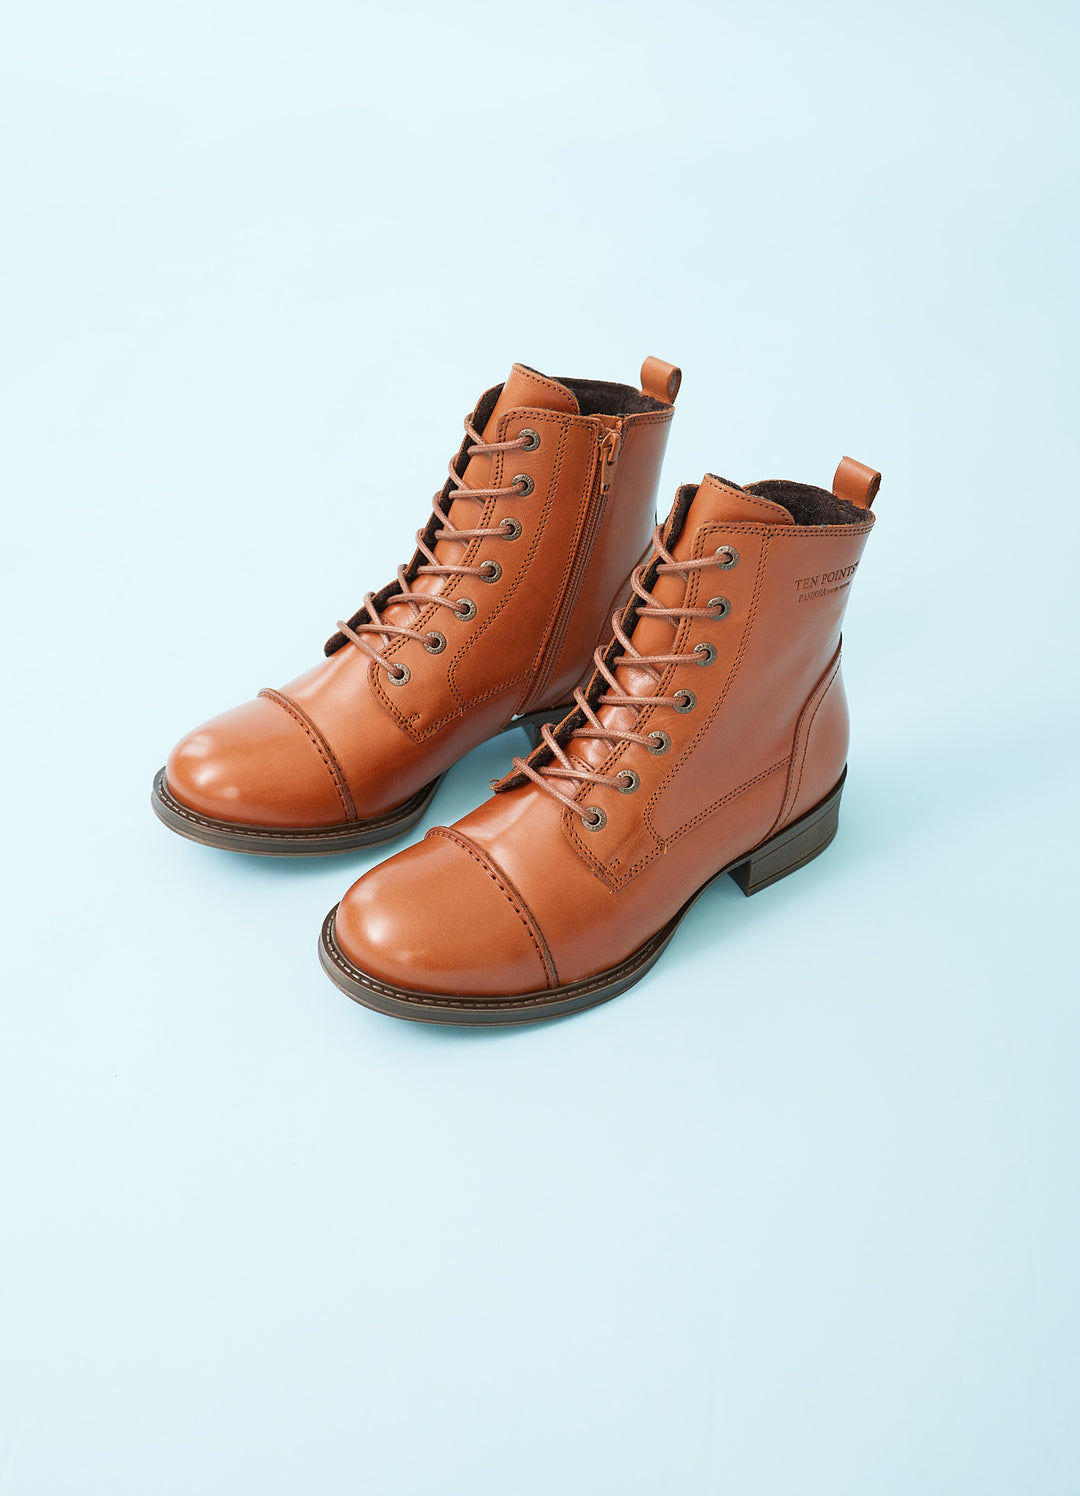 Pandora Lace-up boots in leather - cognac